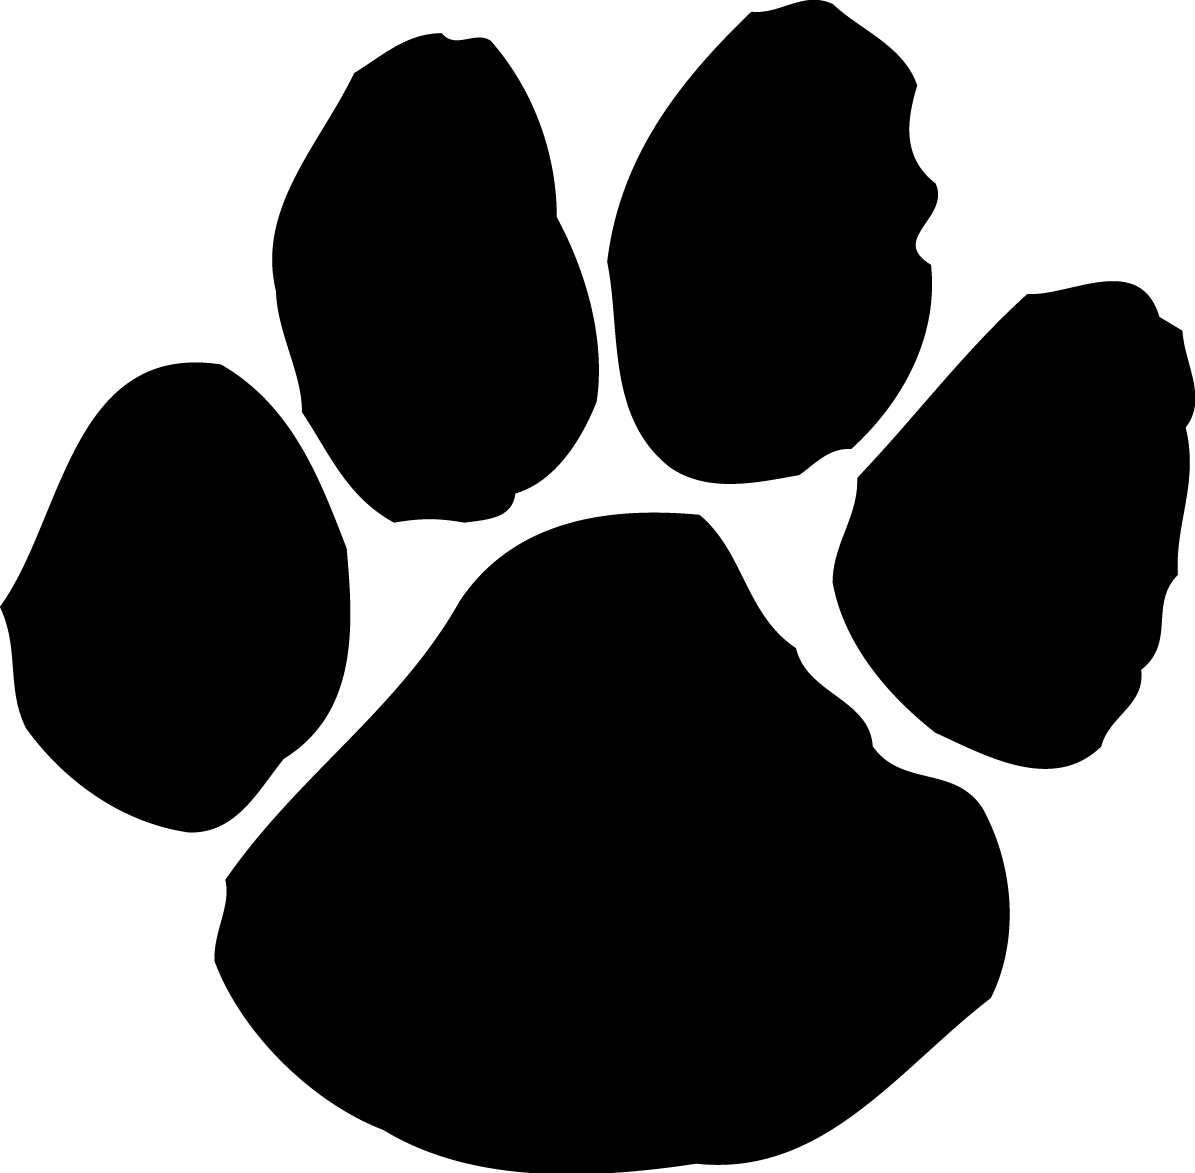 Large Paw Print Think This Could Be Used A Logo Image Or A Marker